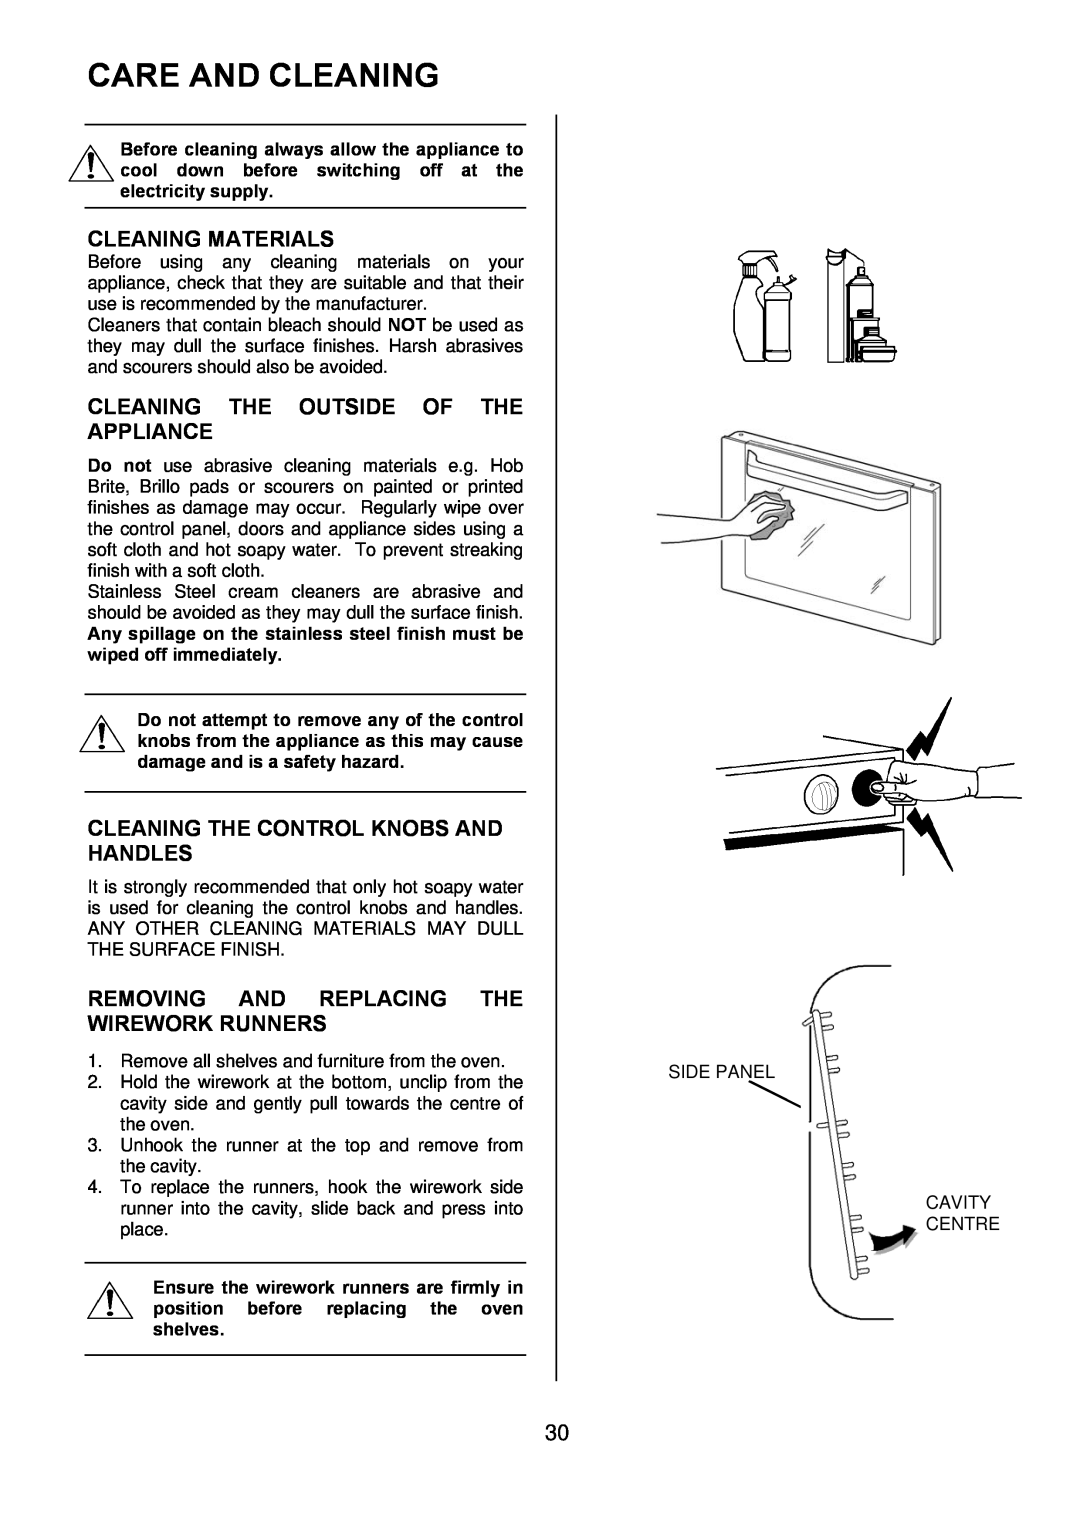 Electrolux D77000GF operating instructions Care And Cleaning, Cleaning Materials, Cleaning The Outside Of The Appliance 